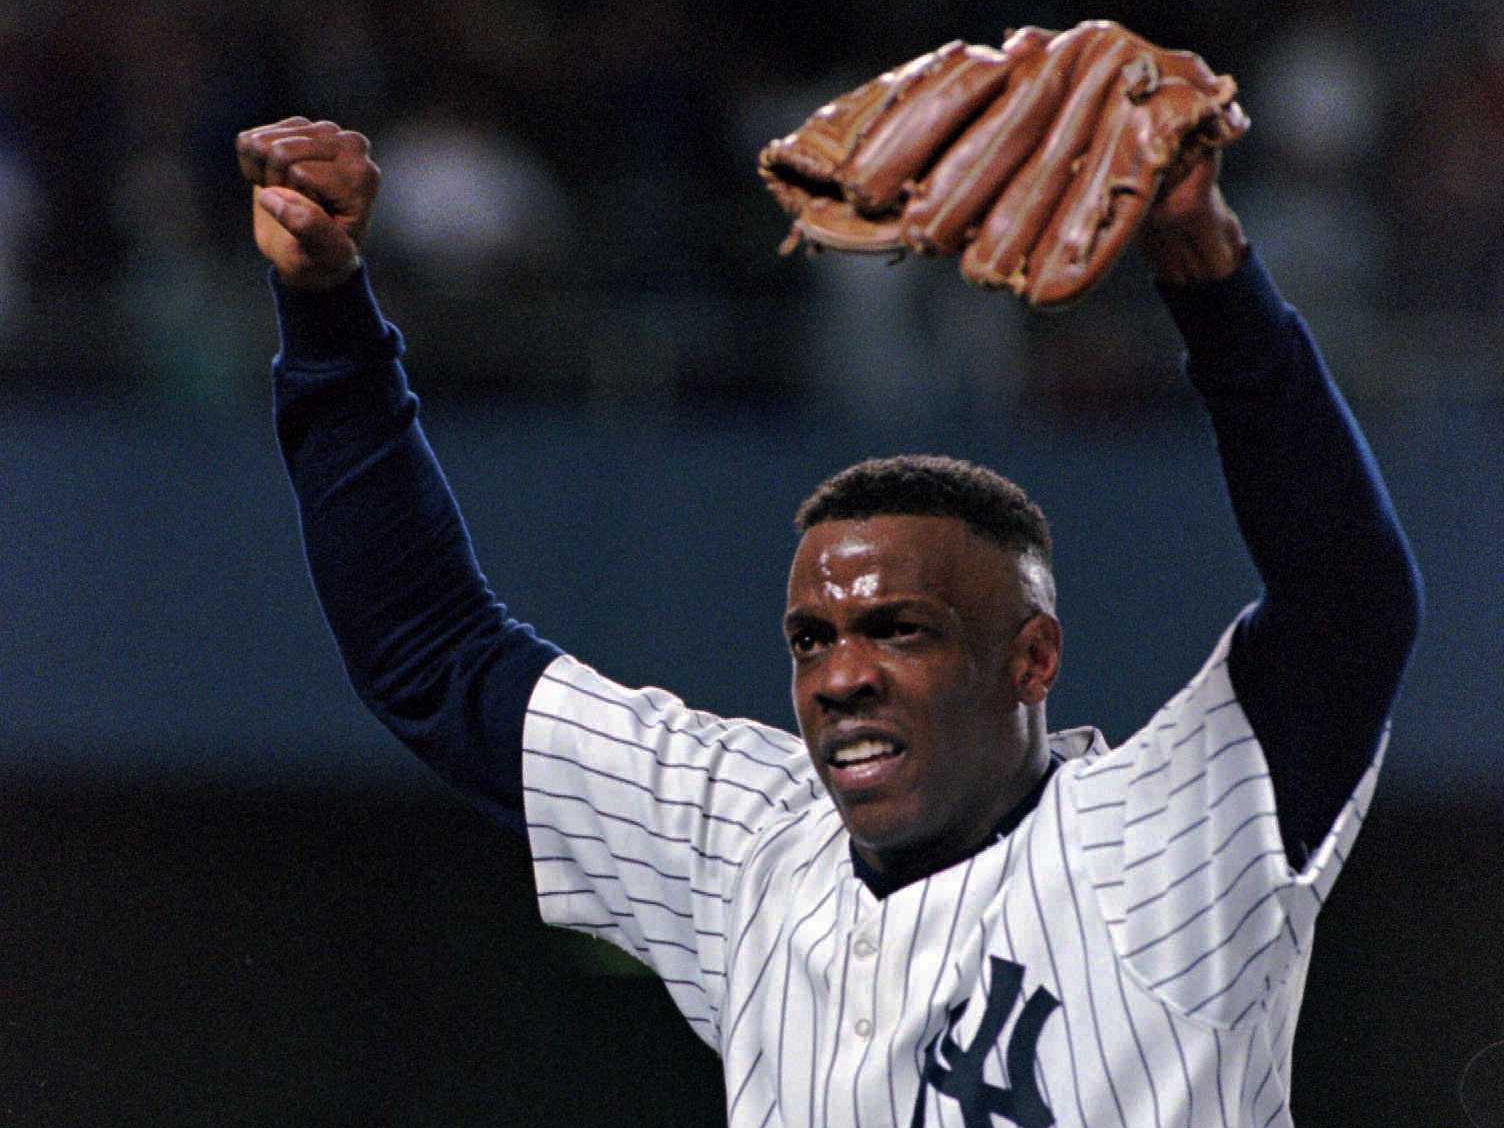 Dwight Gooden No-hitter: The Most Unlikely In Yankees' Pitching History